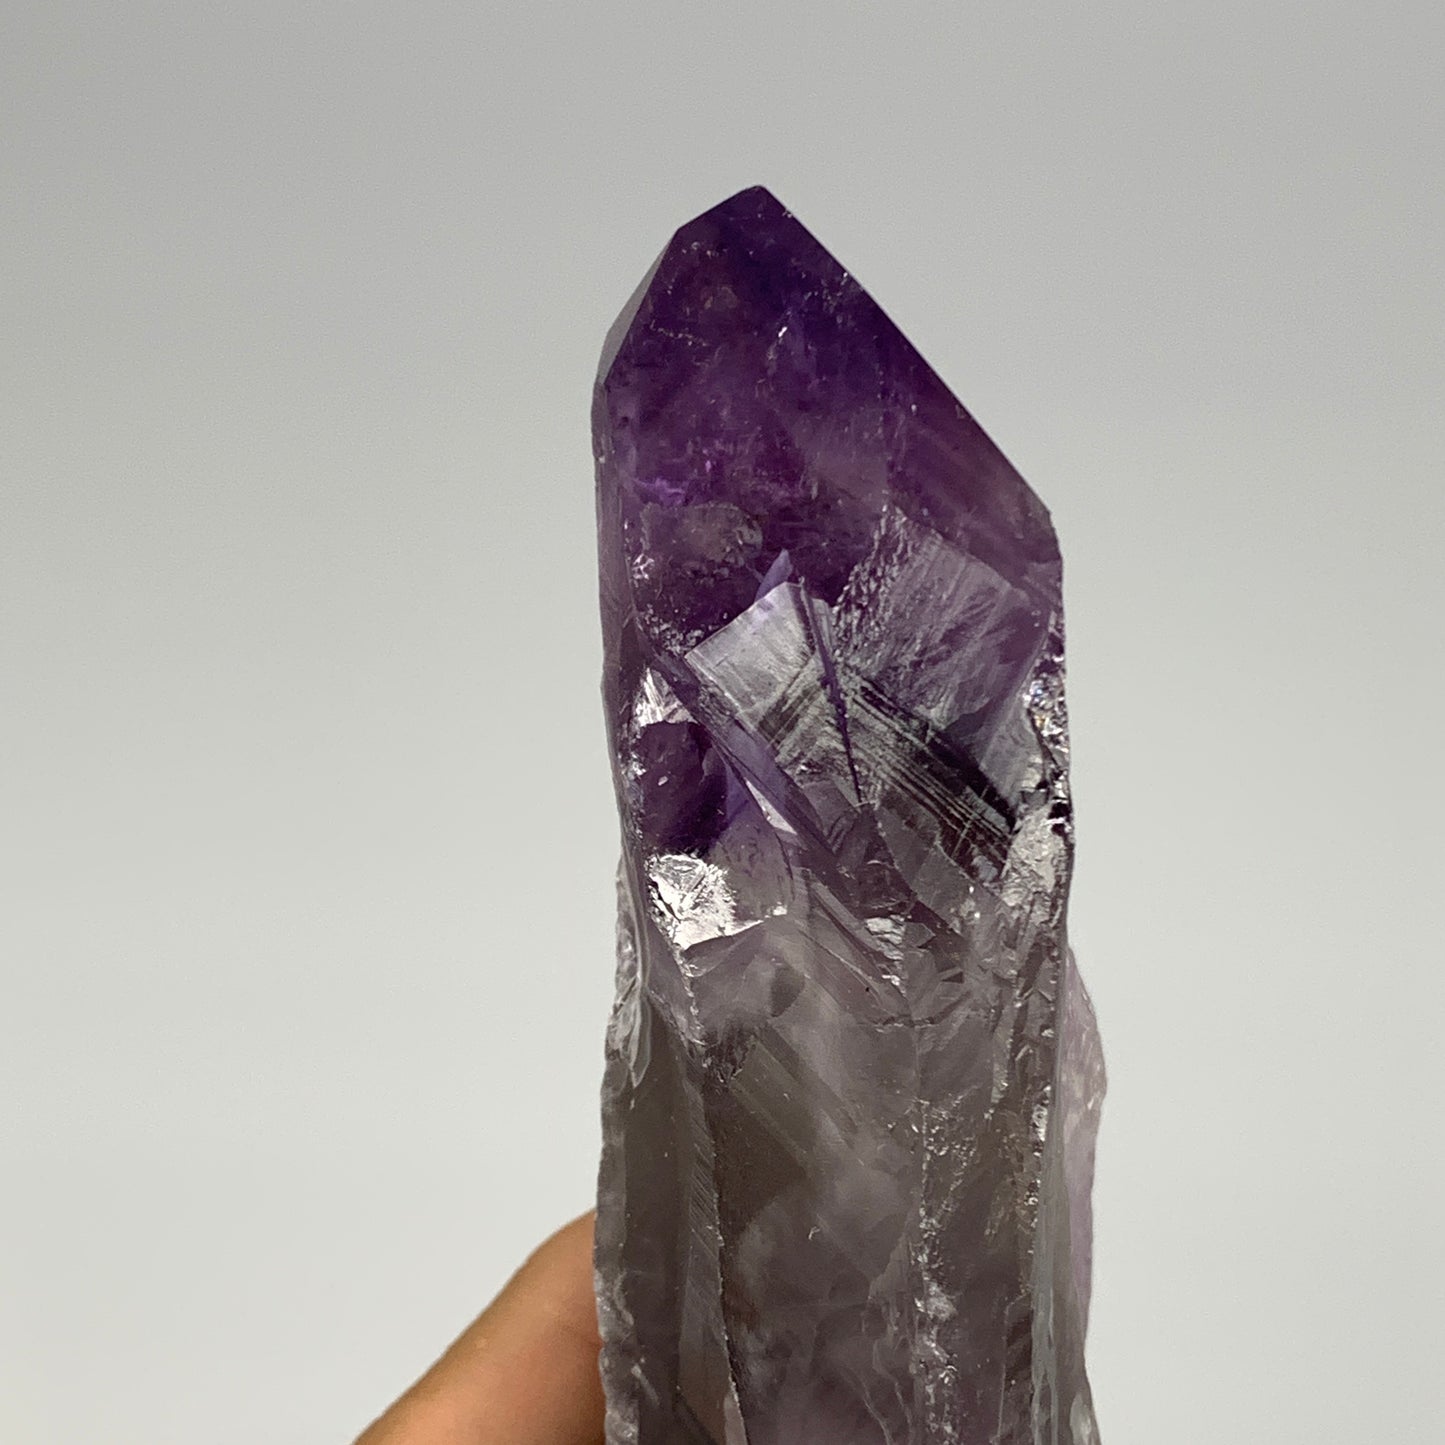 535g,7.7"x2.4"x1.4",Amethyst Point Polished Rough lower part from Brazil,B19120